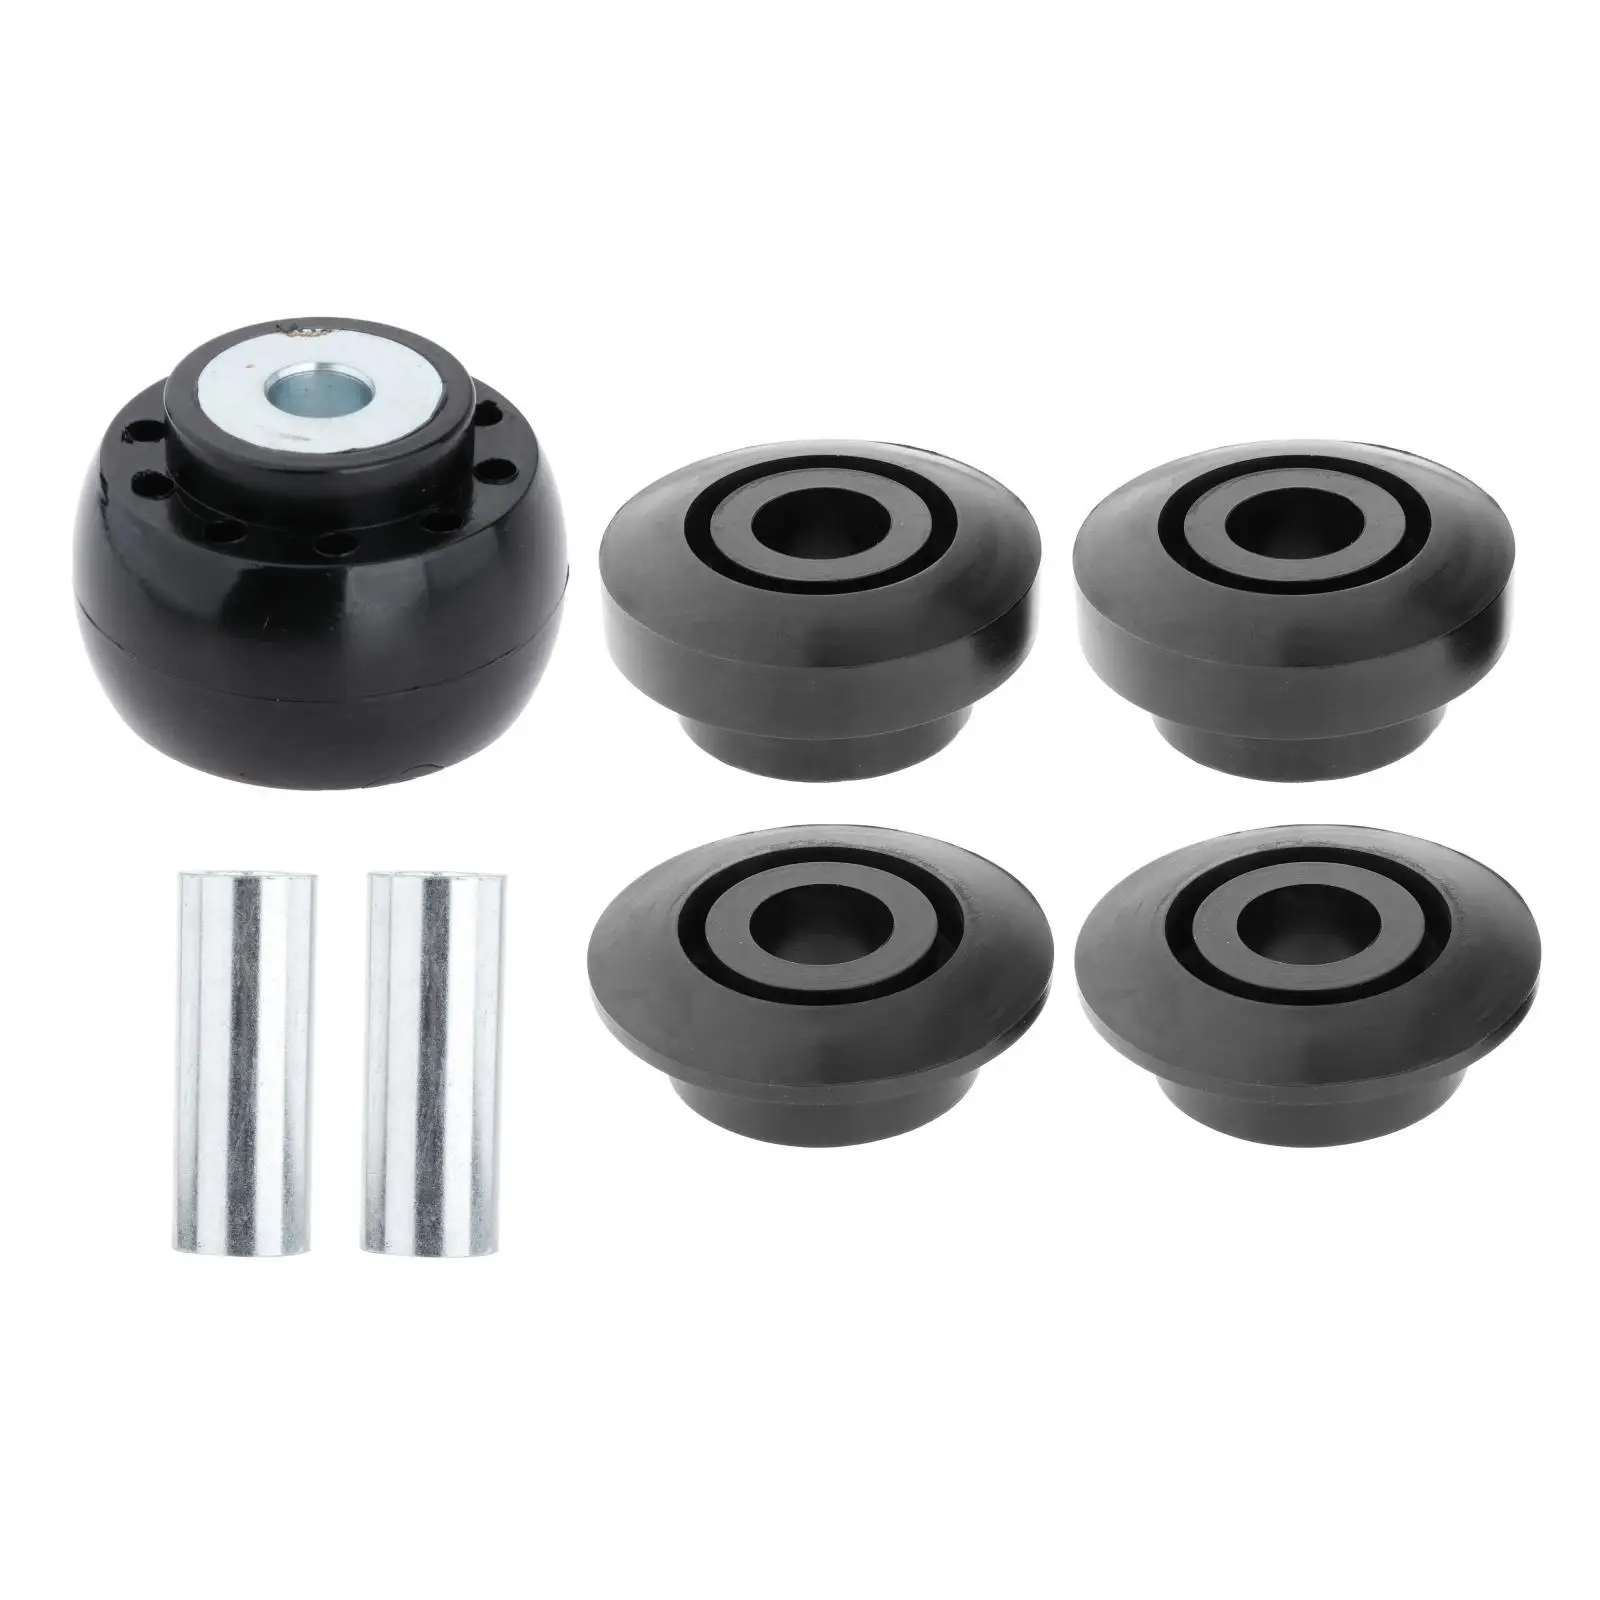 Rear Differential Mount Bushings KDT911 Fits for Nissan 350Z 370Z M35 Parts